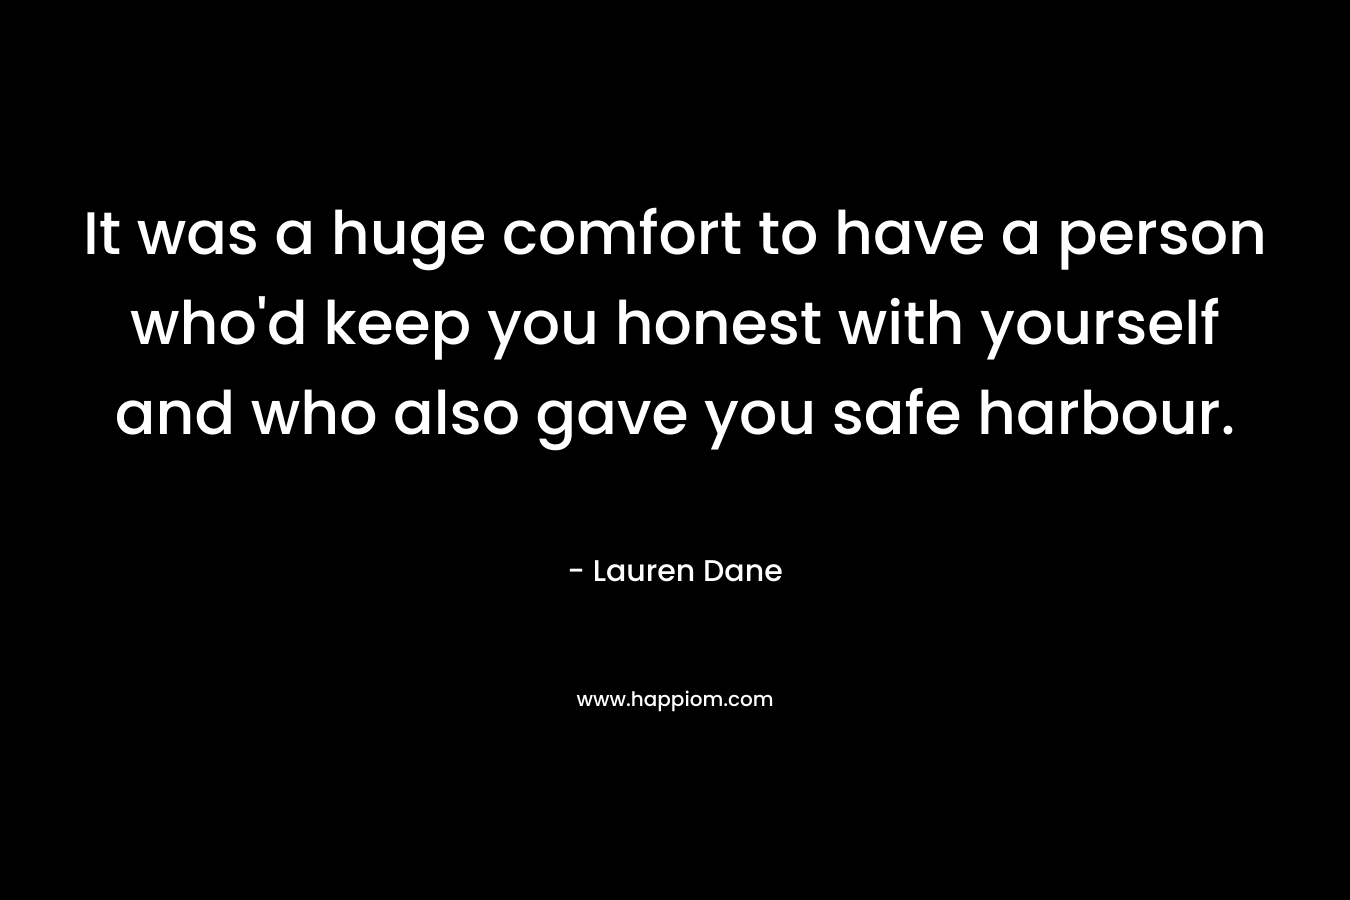 It was a huge comfort to have a person who’d keep you honest with yourself and who also gave you safe harbour. – Lauren Dane